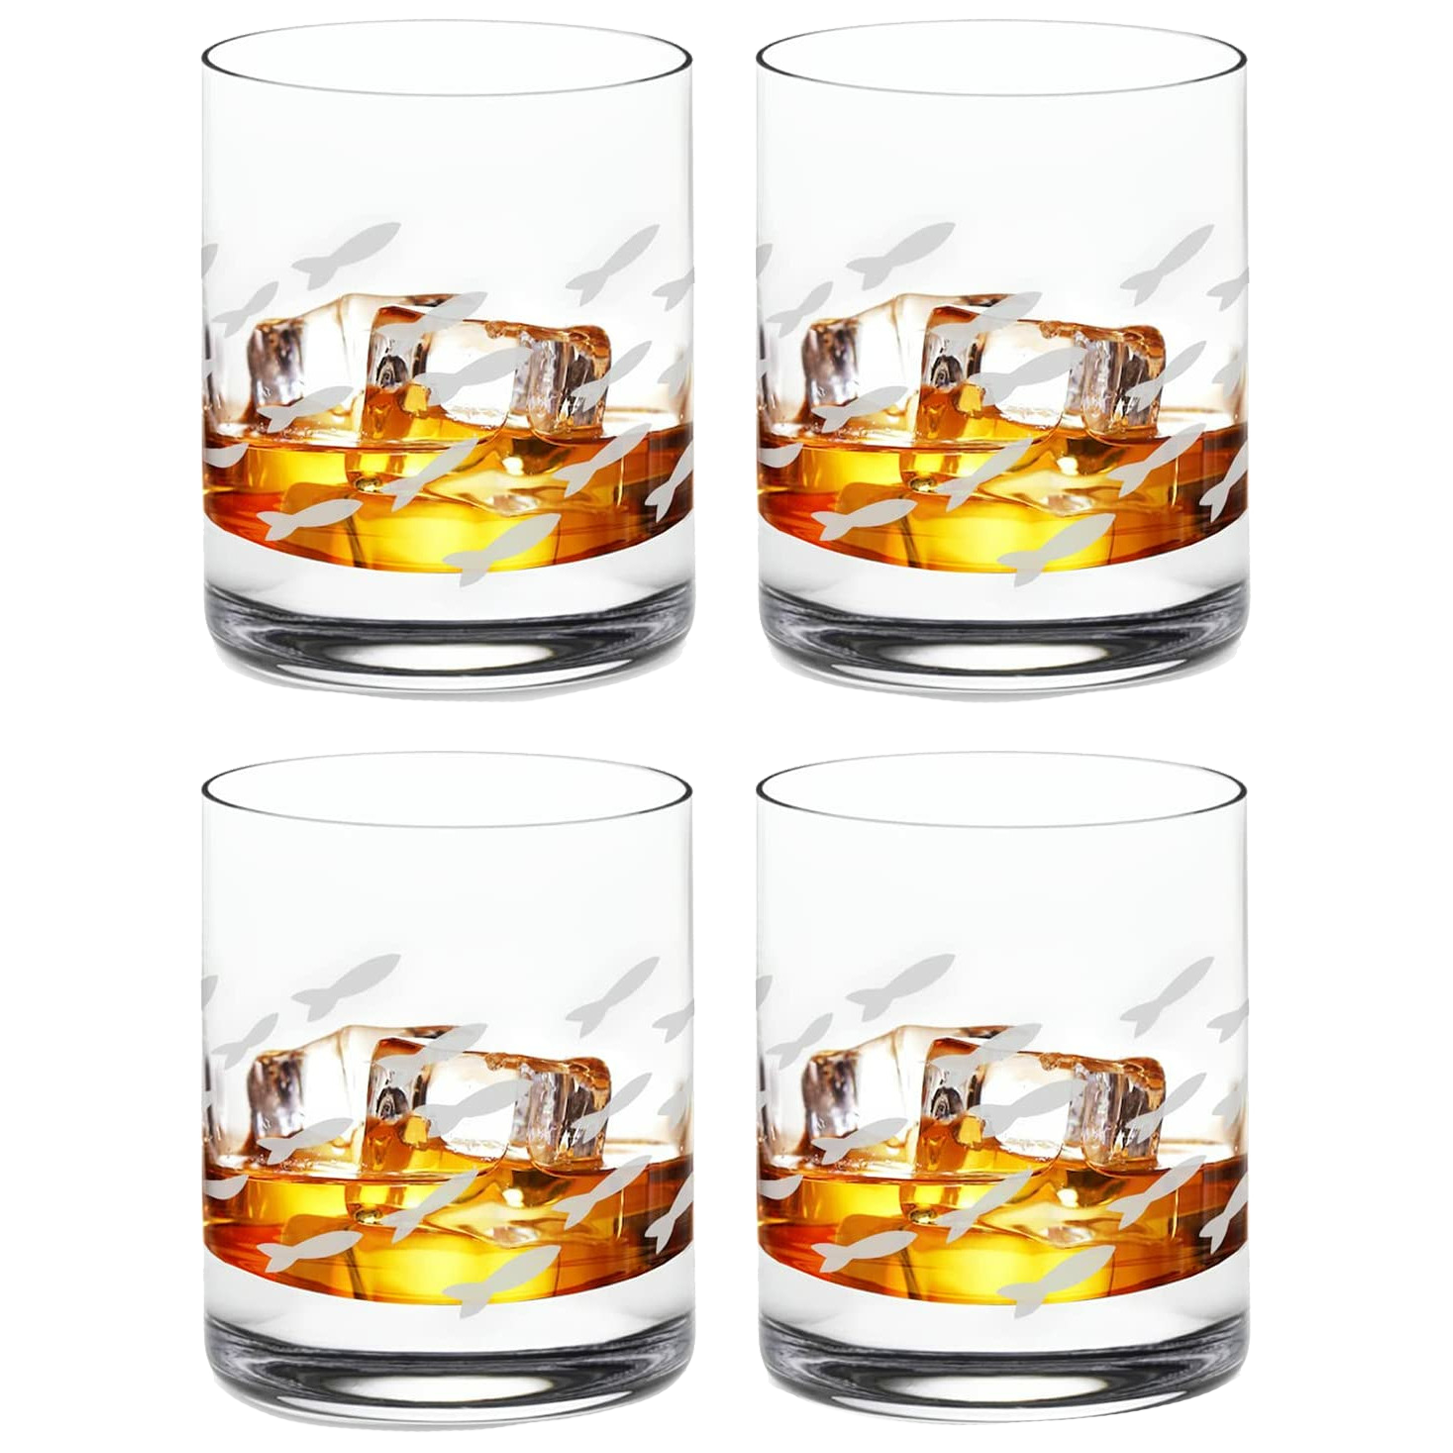 Fish Old Fashion Drinking Glasses, Fish Glasses For White and Red